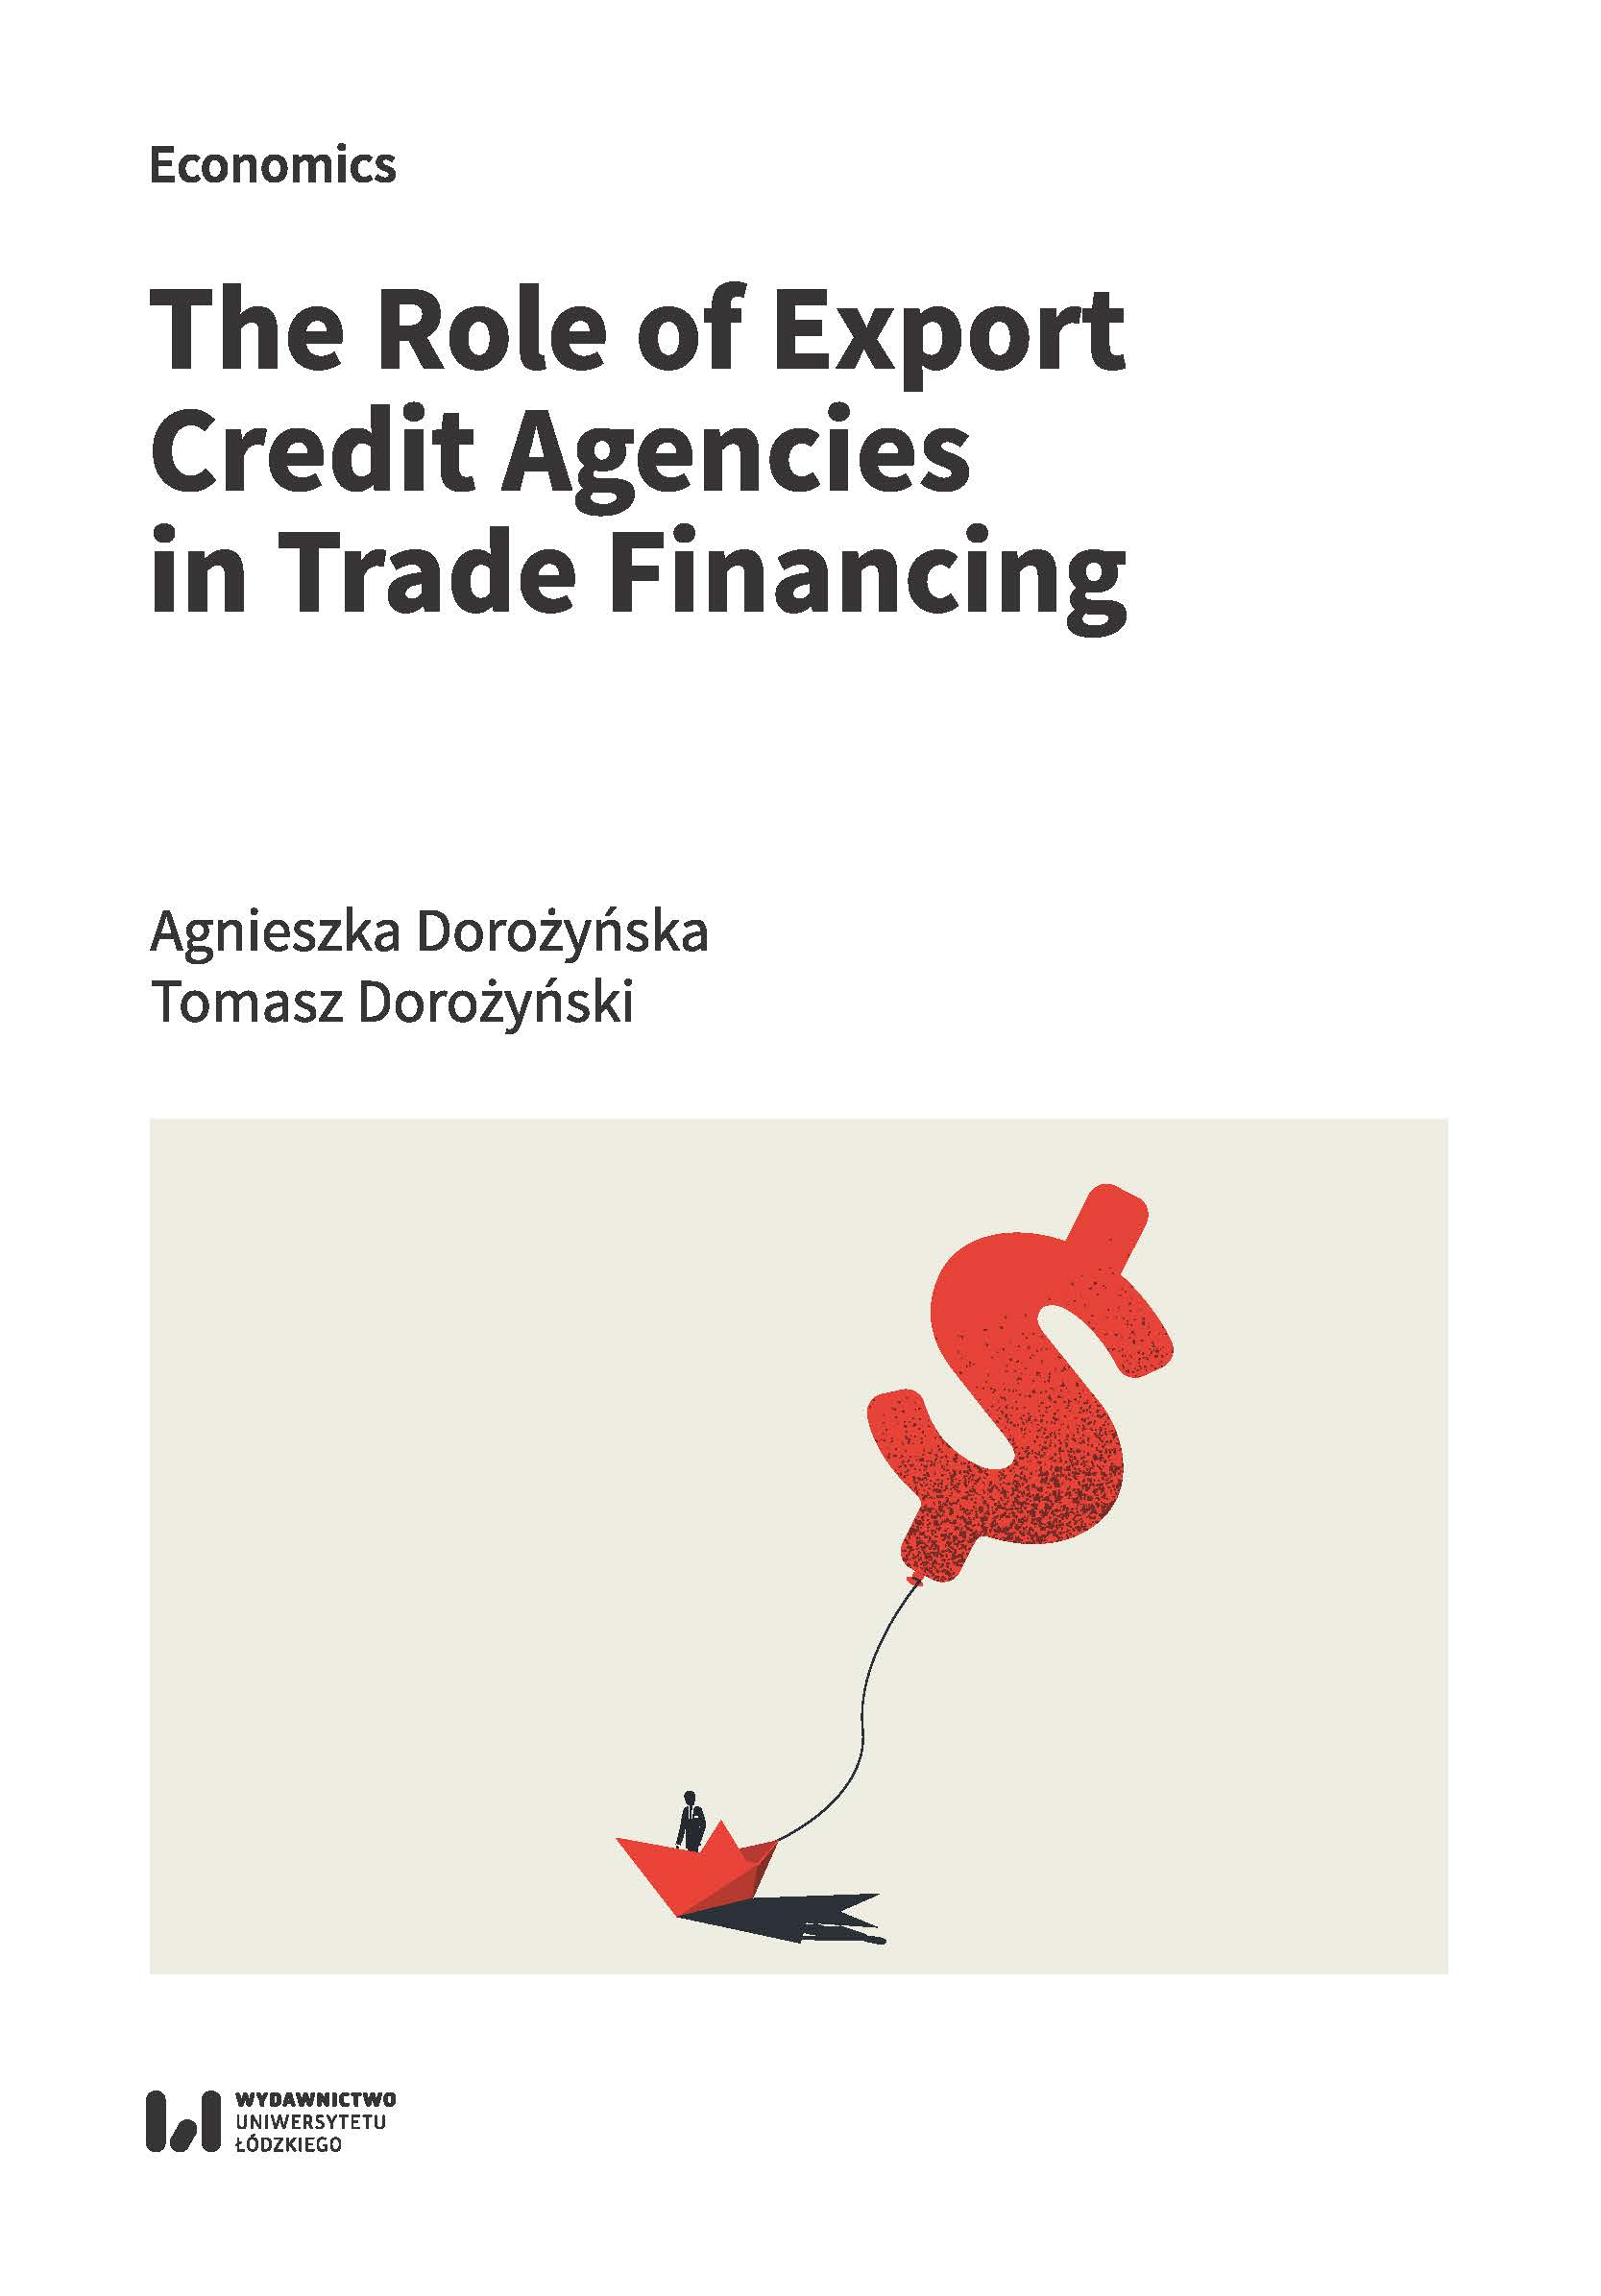 The Role of Export Credit Agencies in Trade Financing